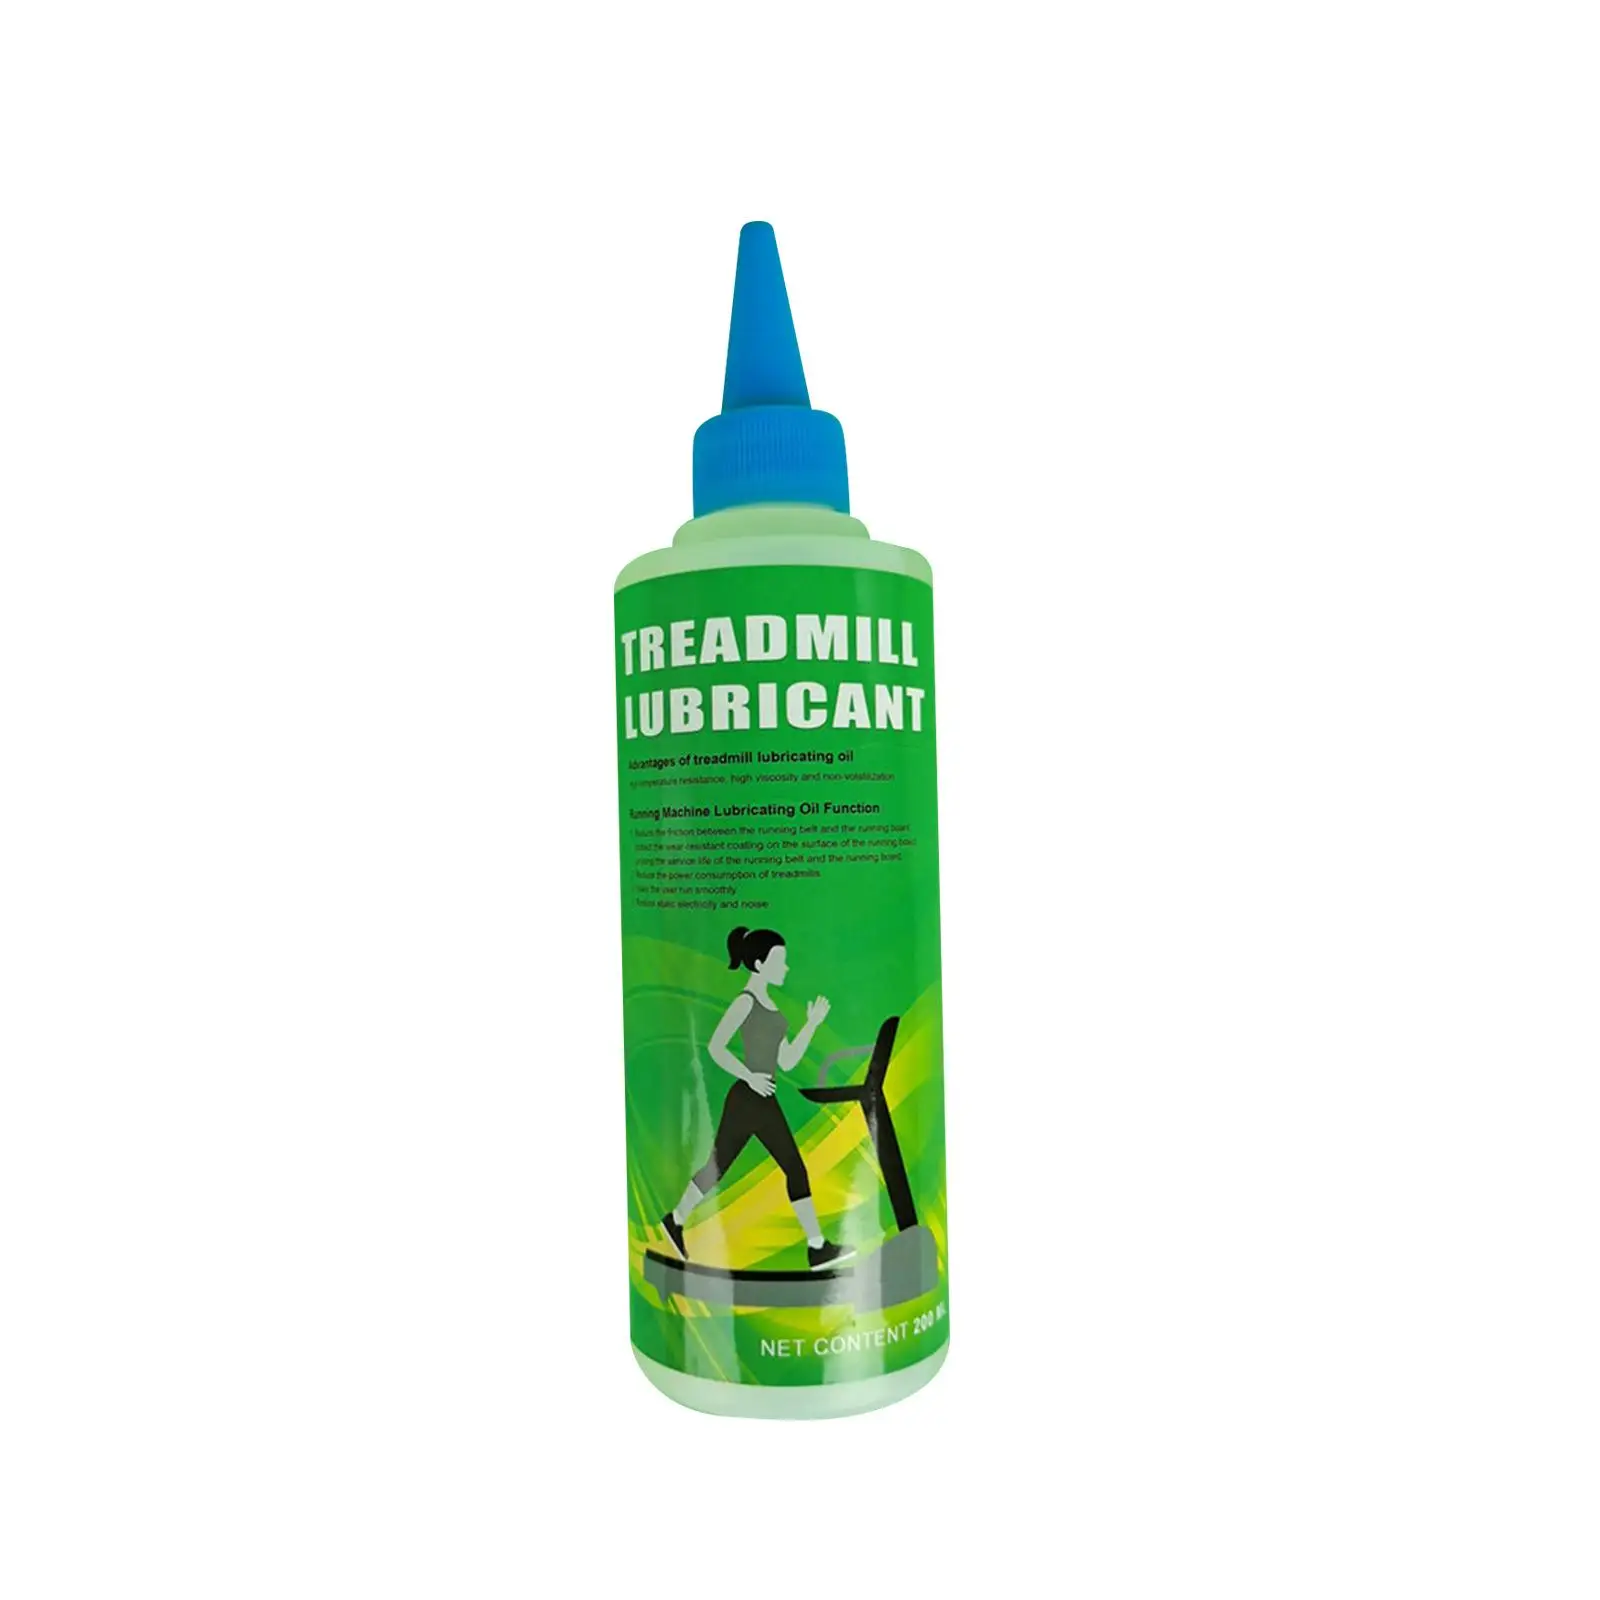 Treadmill Belt Lubricant 200ml Running Machine Oil Widely Applicable Portable for Gym